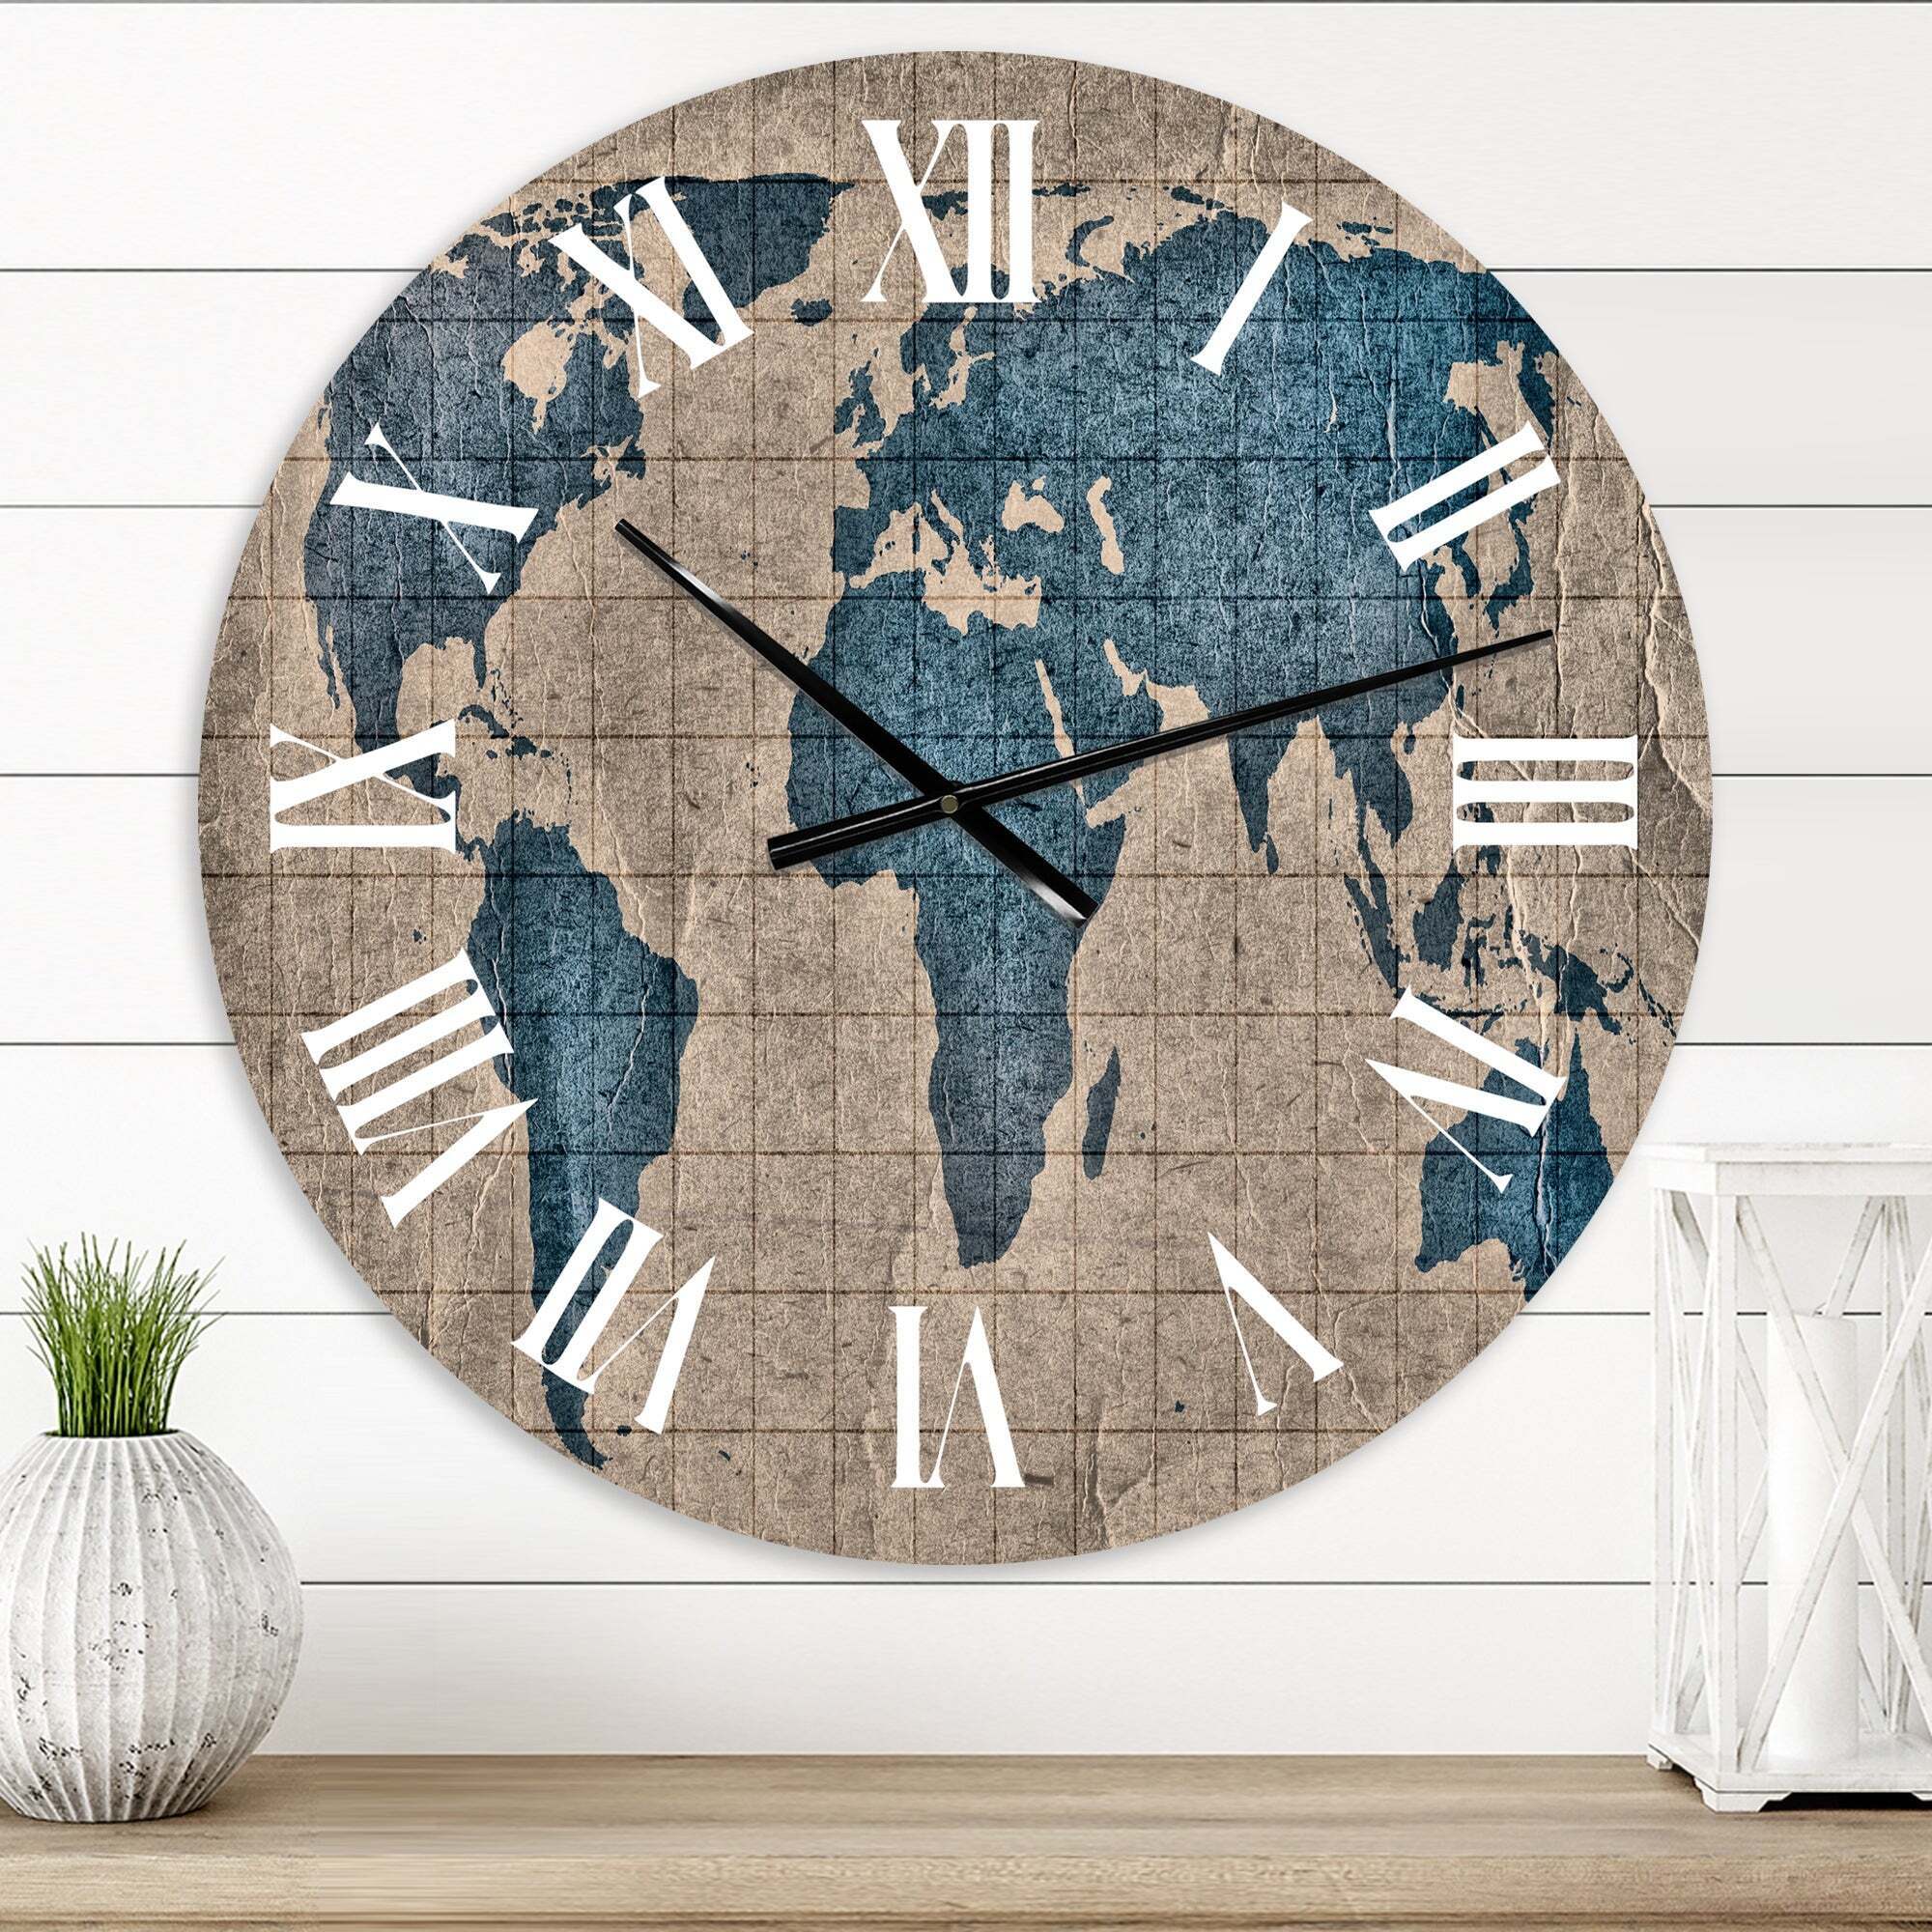 Huge wall clocks inspired by historic antique maps